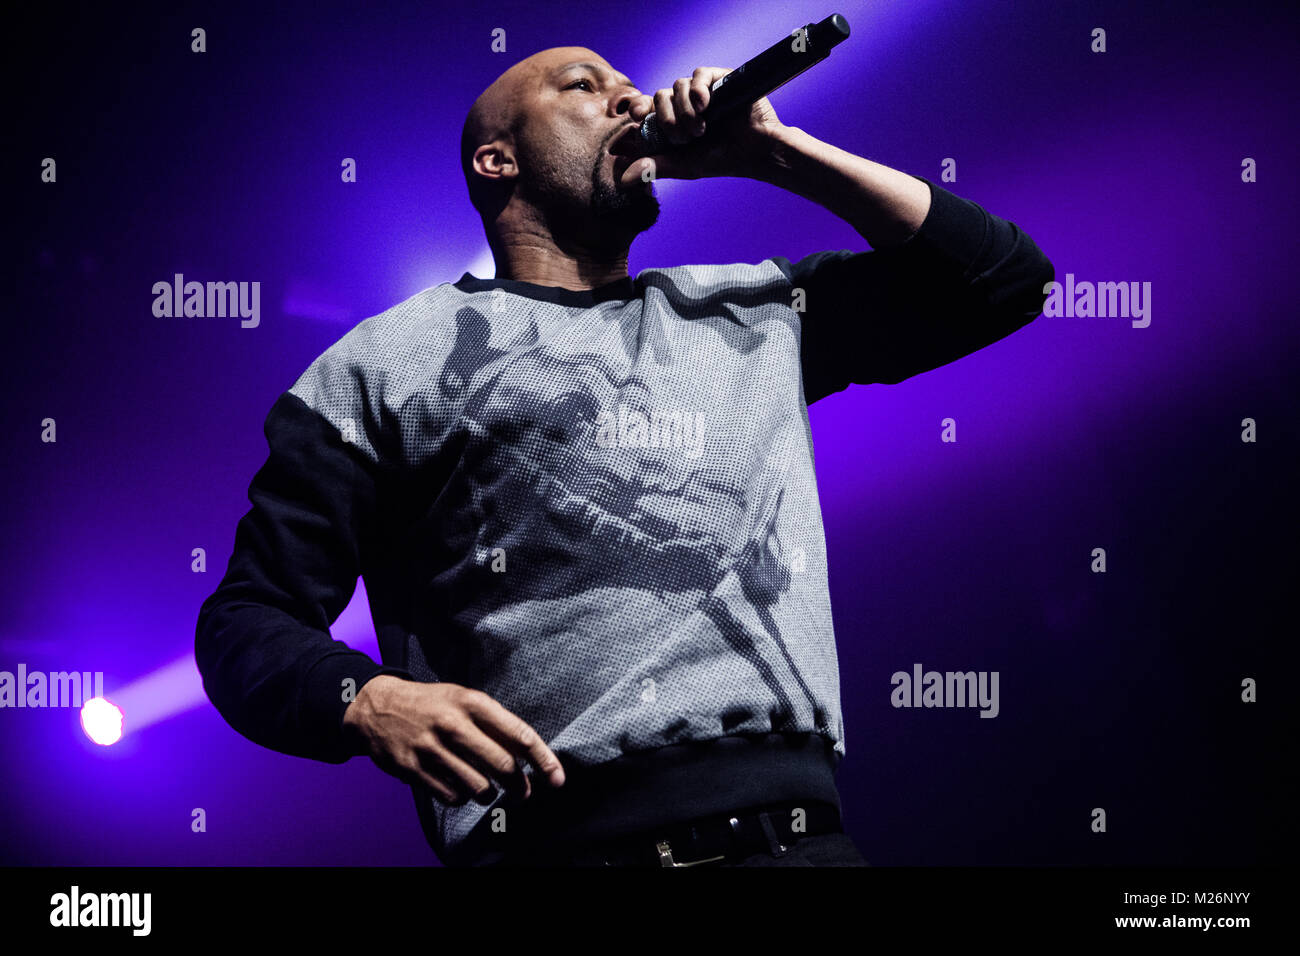 The American rapper, songwriter and hip hop recording artist Lonnie Rashid Lynn Jr. is better known by his stage name Common (formerly Common Sense). Here he performs a live concert at Vega in Copenhagen. Denmark, 14/11 2014. Stock Photo